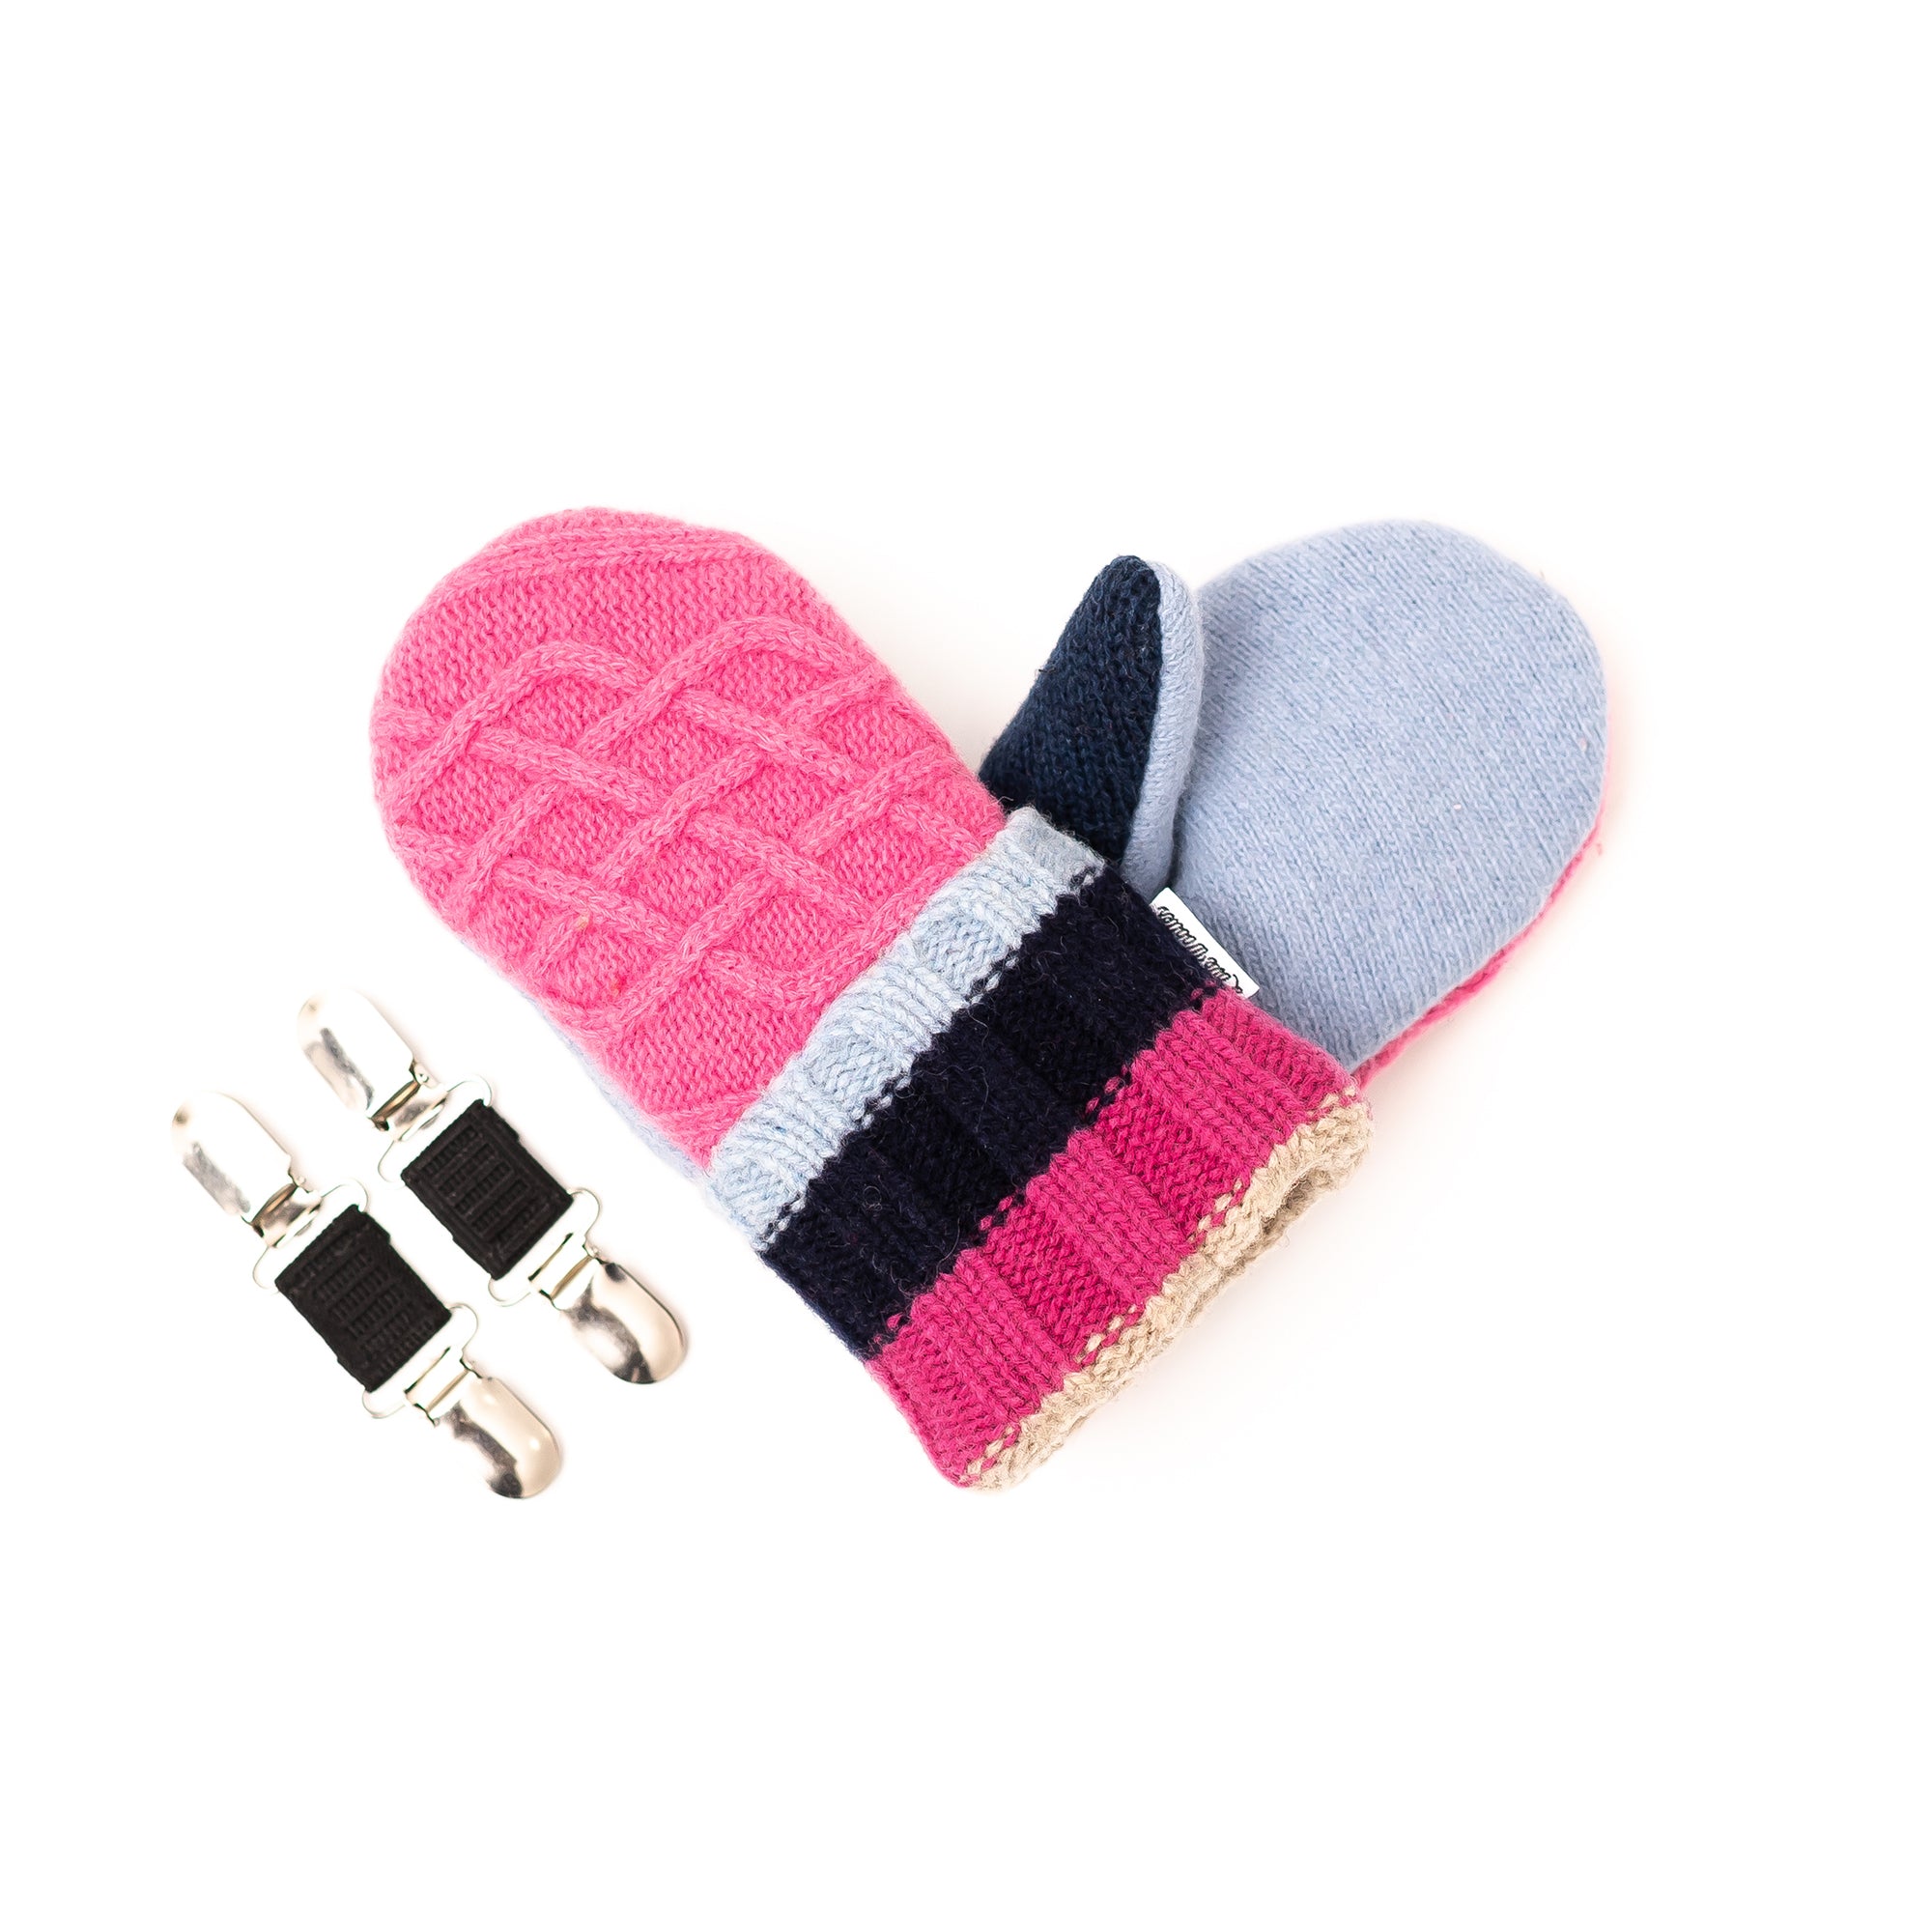 Large Kid's Wool Sweater Mittens | All A's